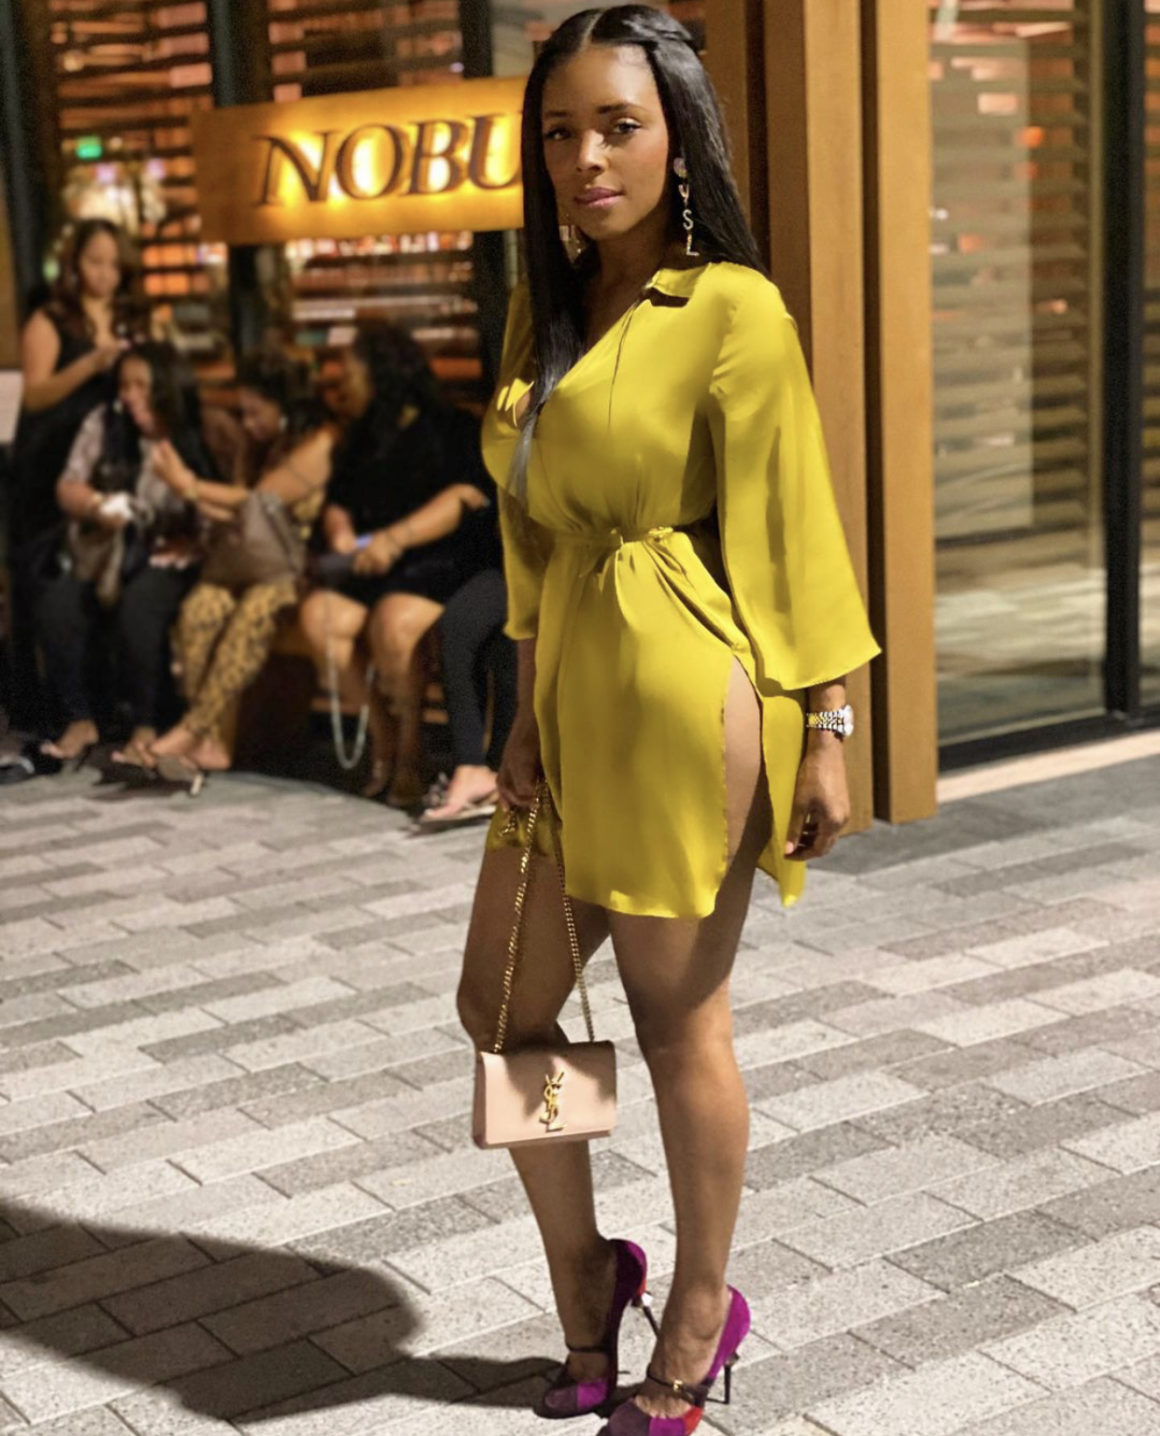 You Ask, We Answer! Angel Love Wore a $40 Mustard Zara Belted Satin Dress, Miu Miu Suede Color Block Pumps, and Beige Saint Laurent Chain Wallet at Nobu